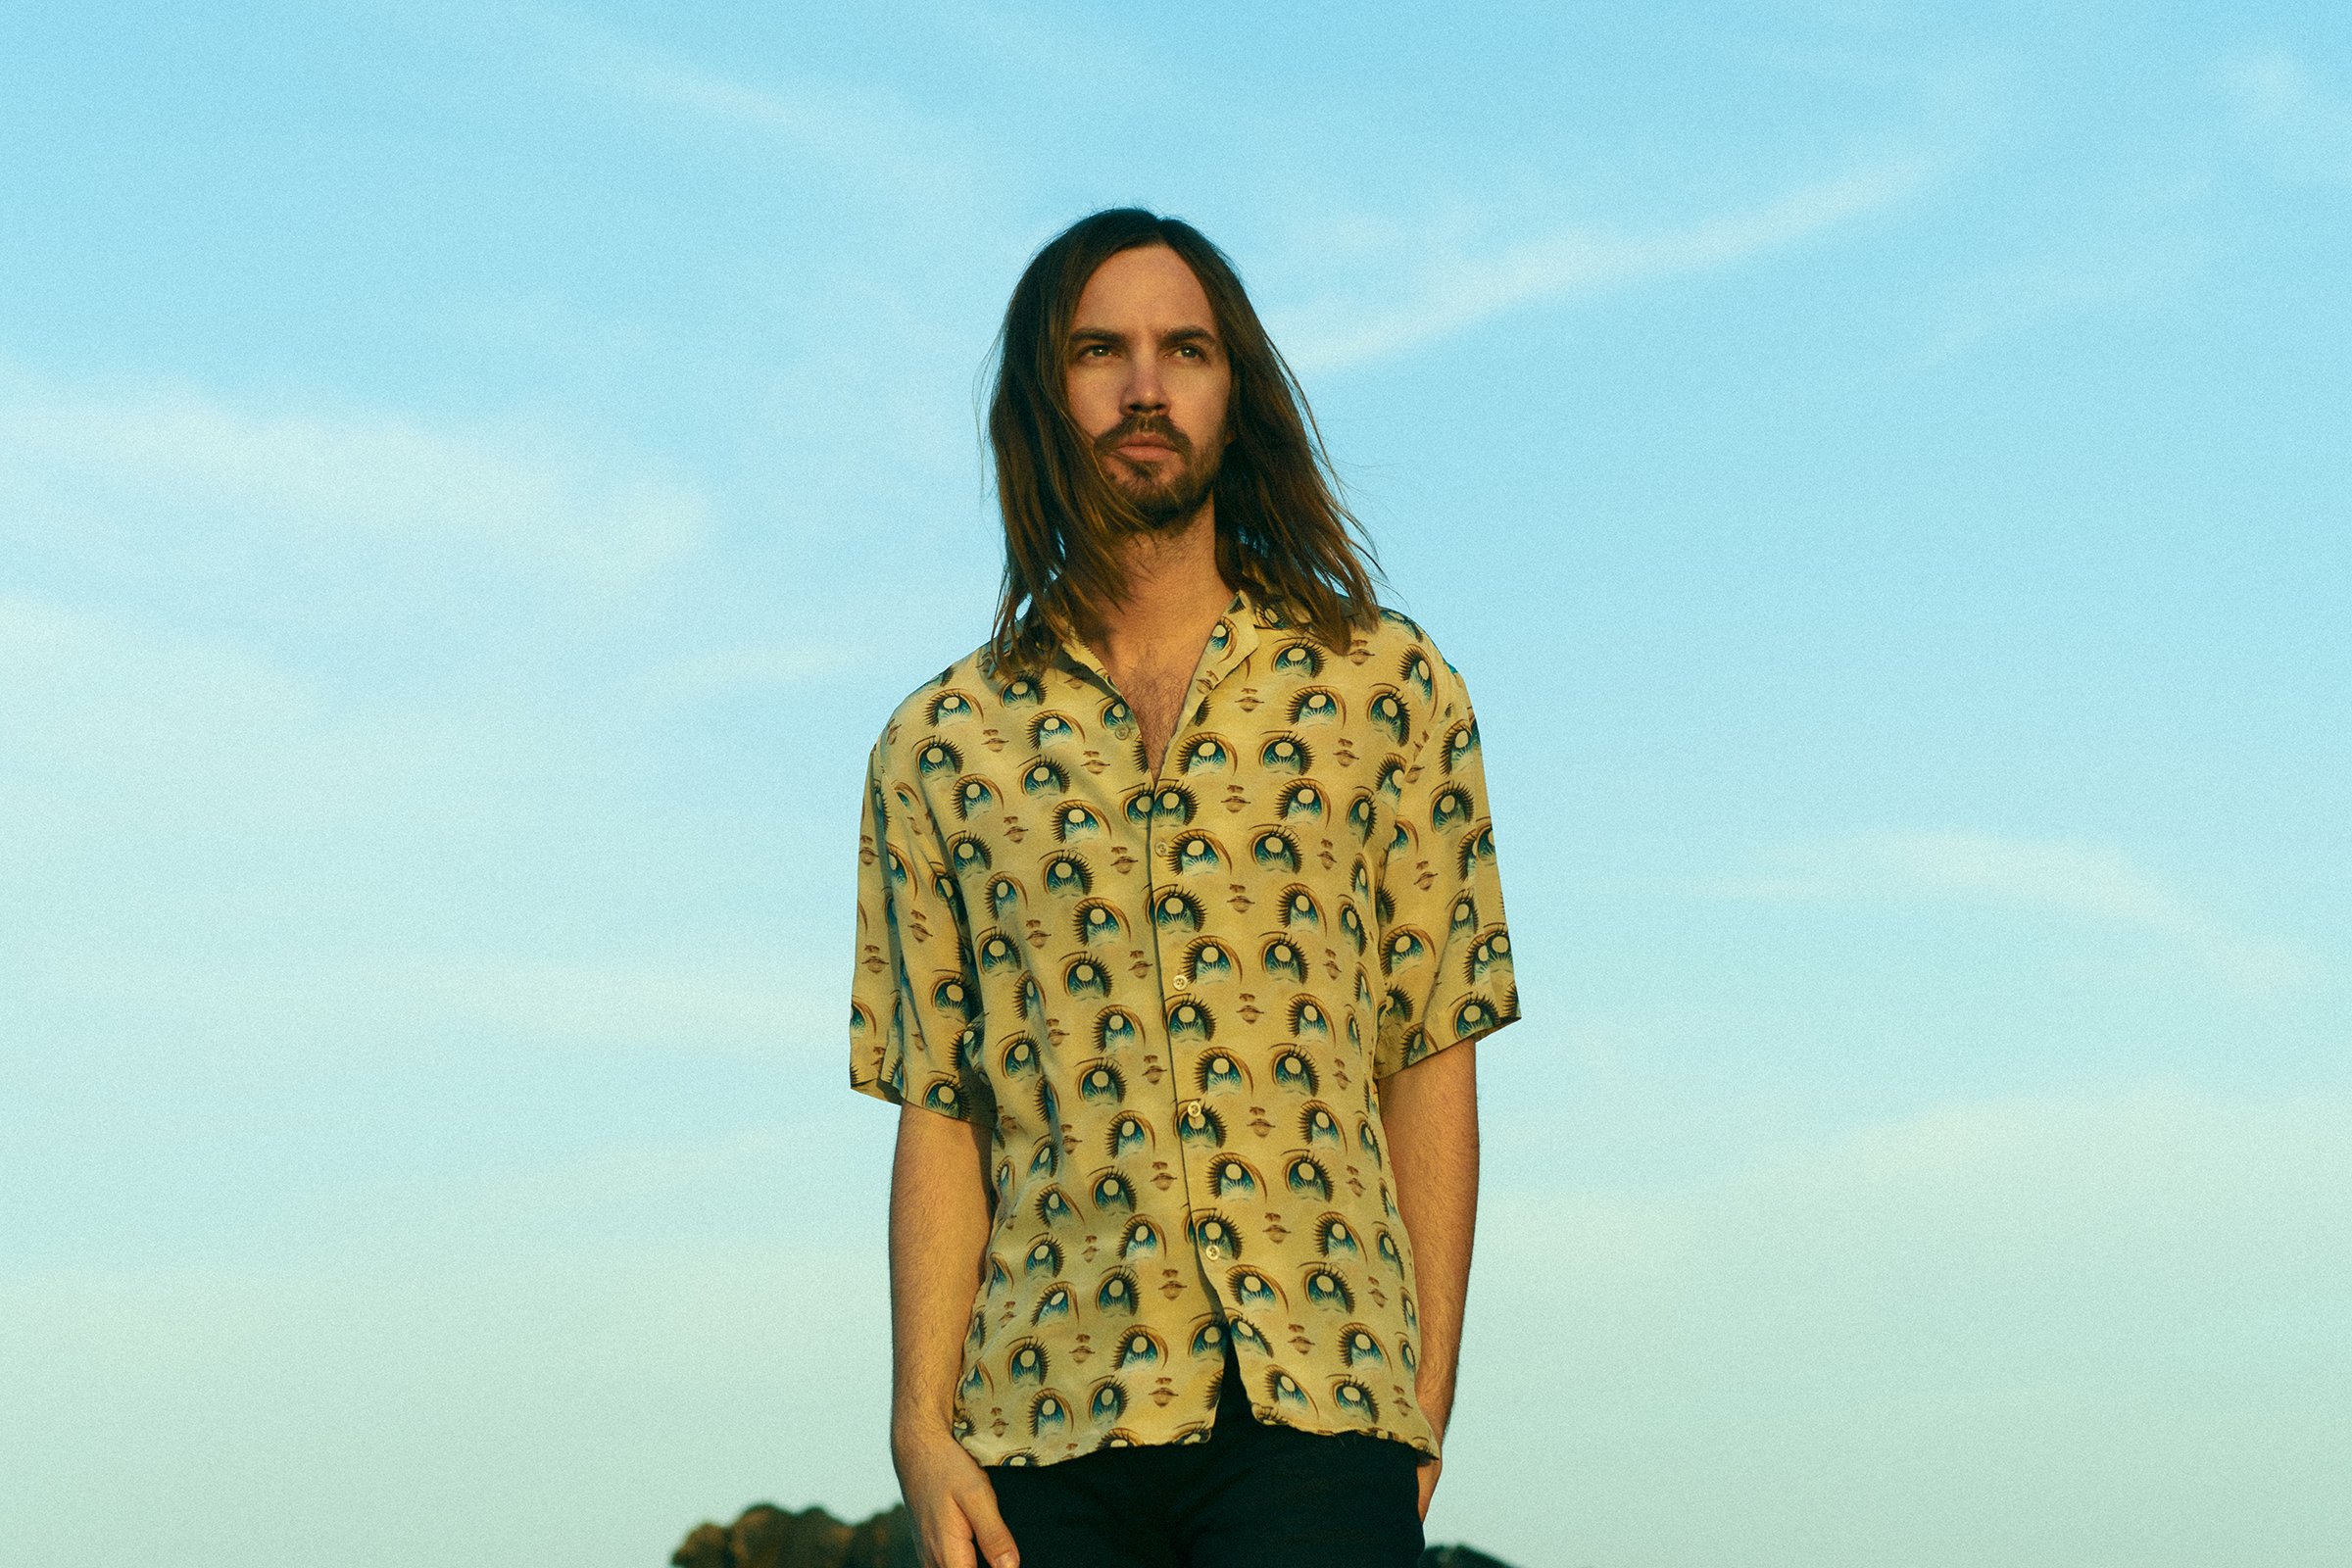 TAME IMPALA shares music video for 'Lost In Yesterday' - Watch Now 